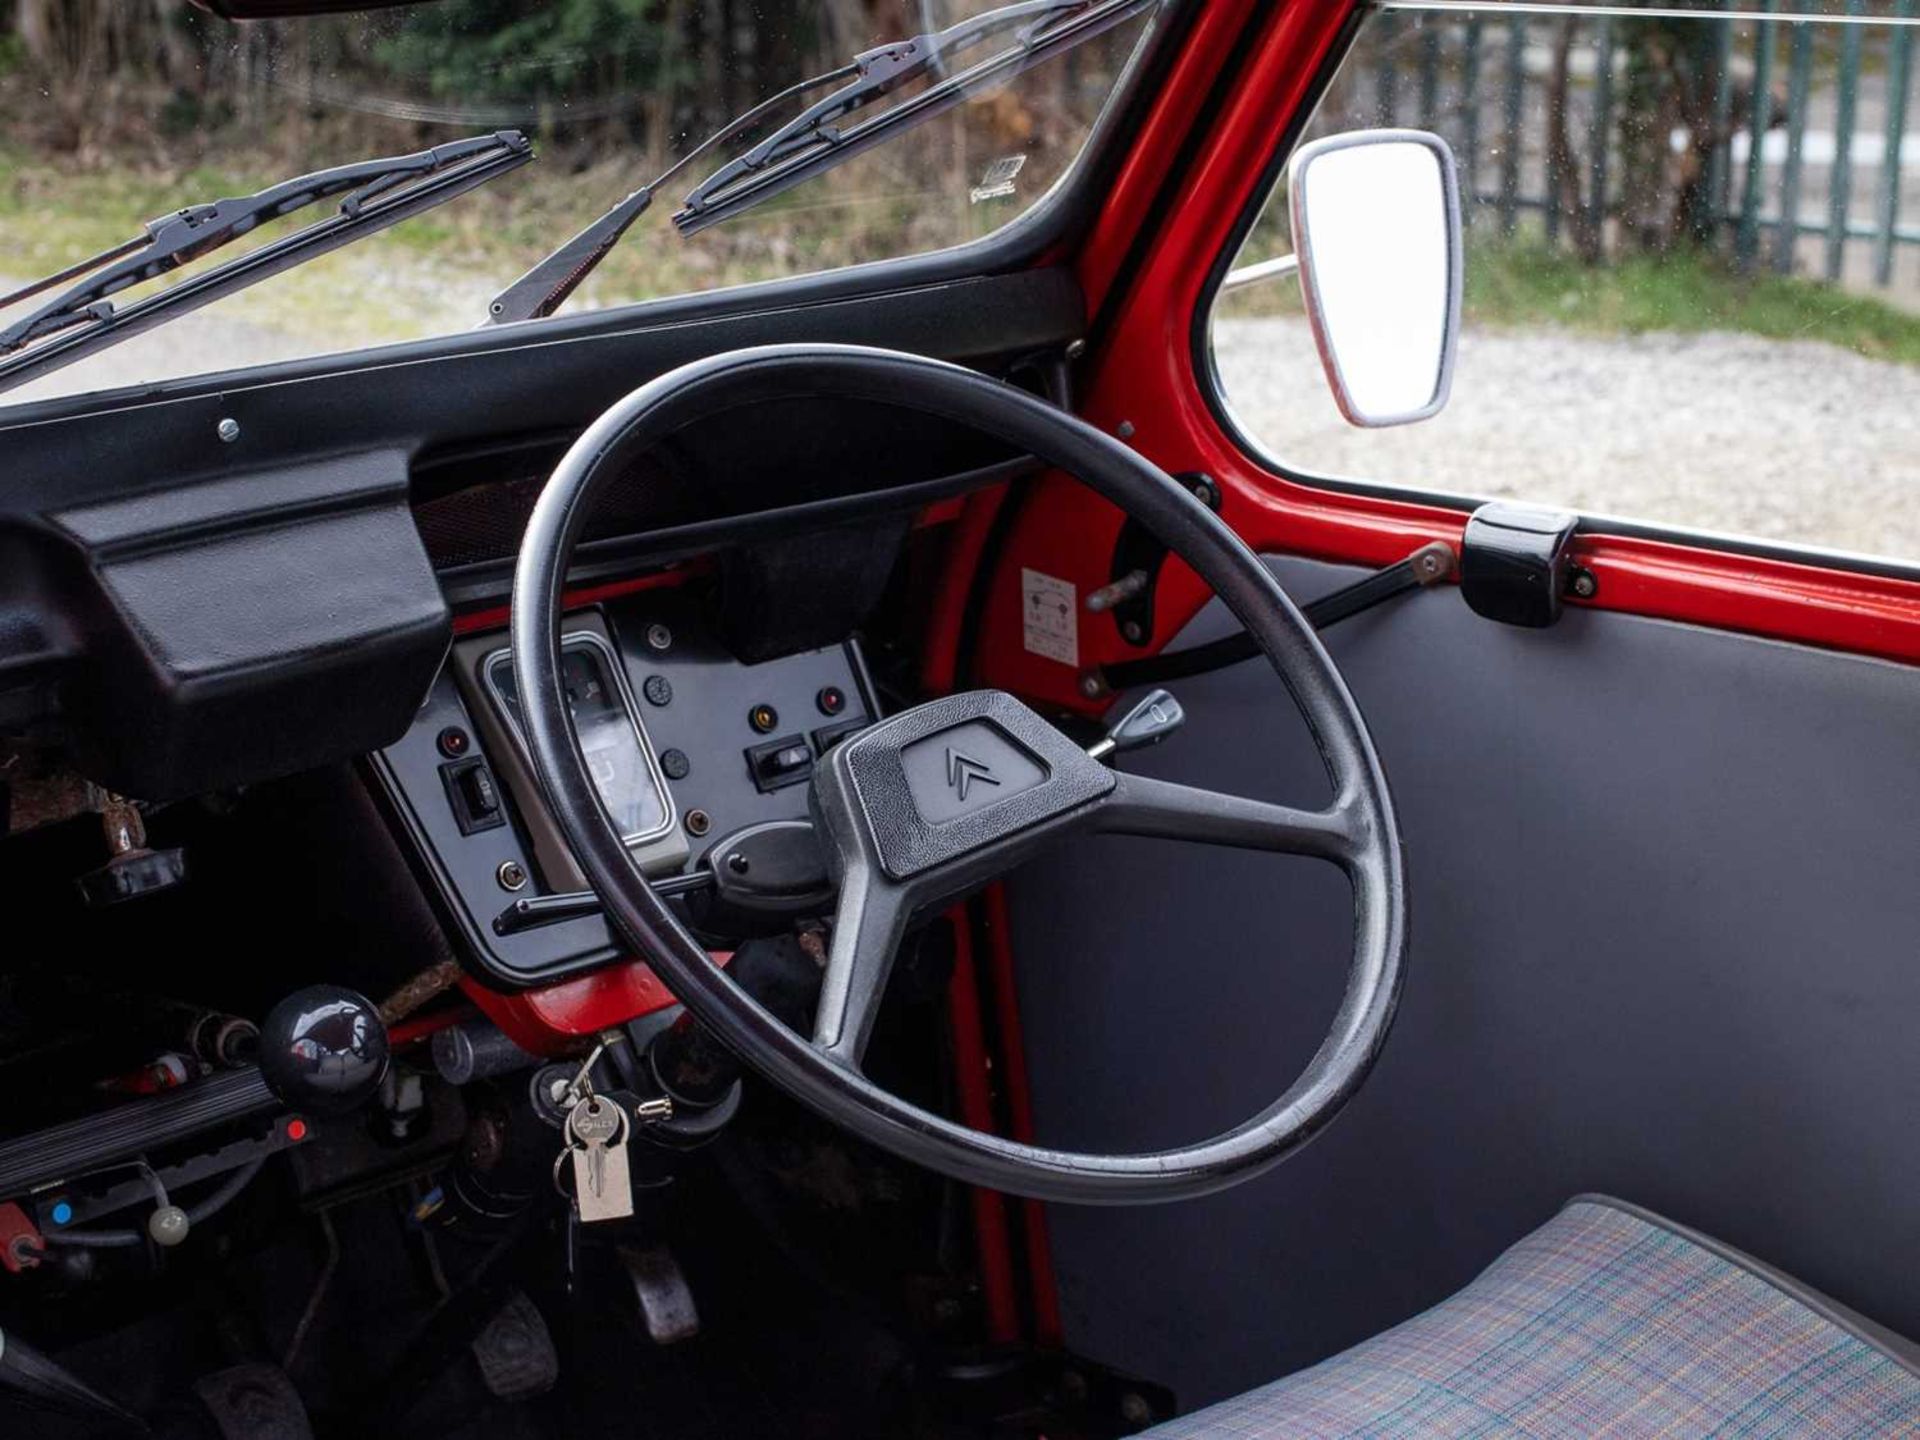 1989 Citroën 2CV6 Spécial Believed to have covered a credible 15,000 miles - Image 36 of 113